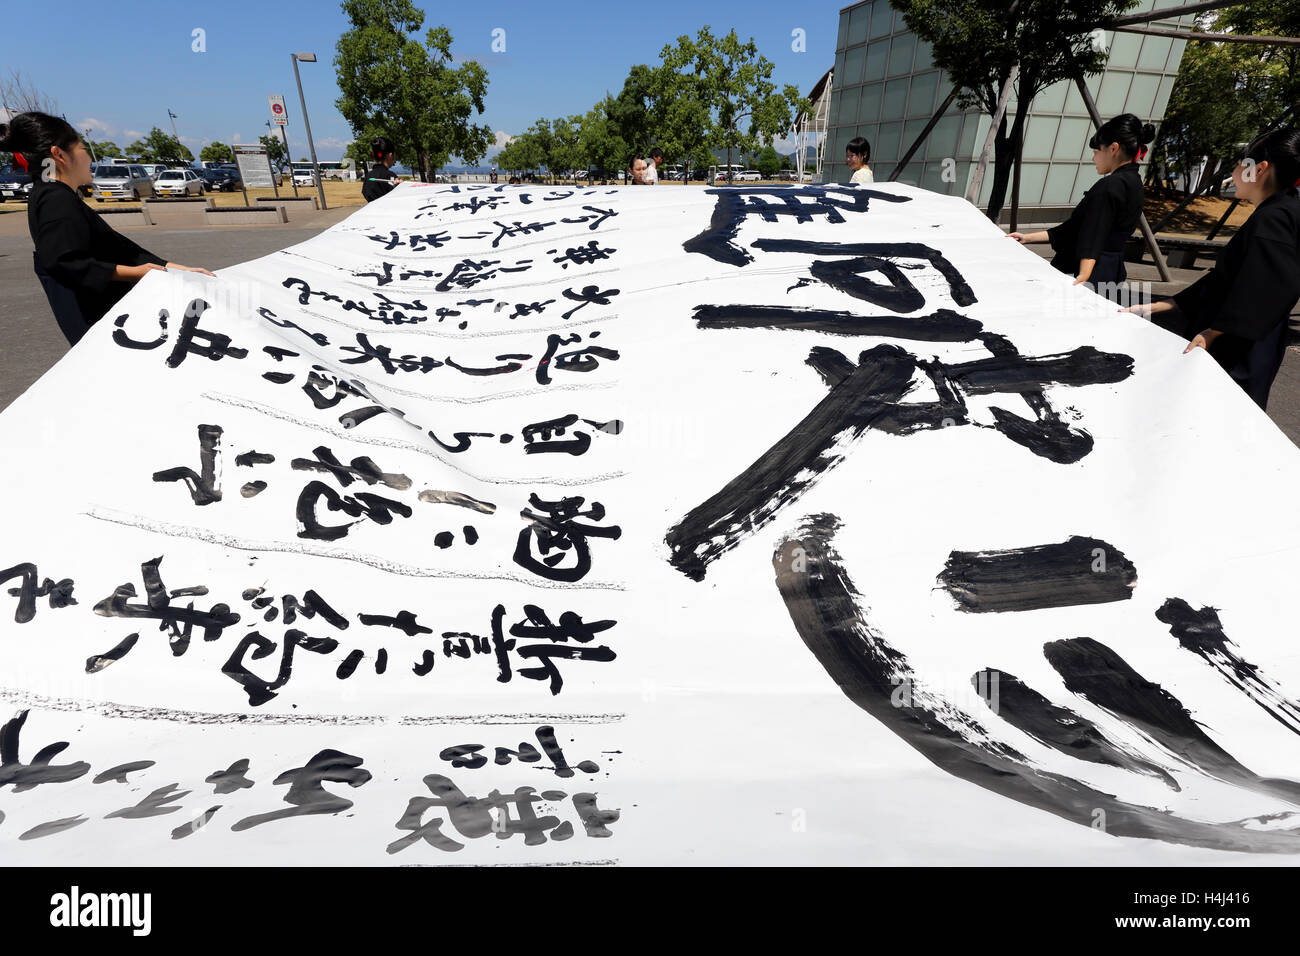 Japanese schoolgirls competes for the written technology in a Kagawa Calligraphy Festival 2016. Stock Photo